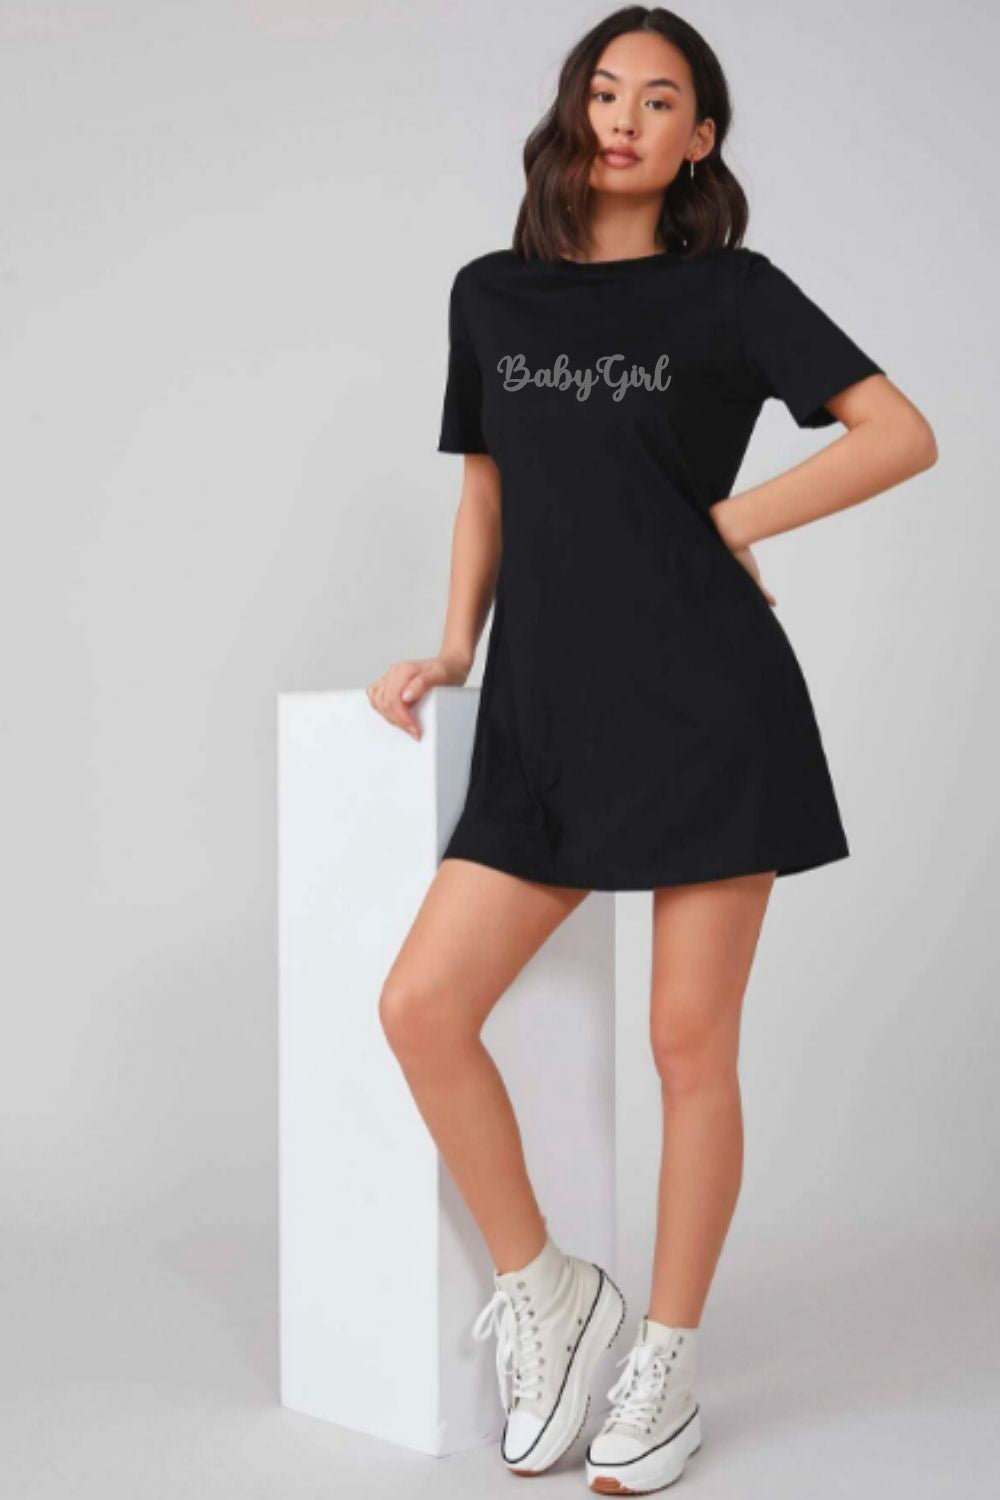 Baby Girl Graphic Printed Black Solid T-shirt Dress